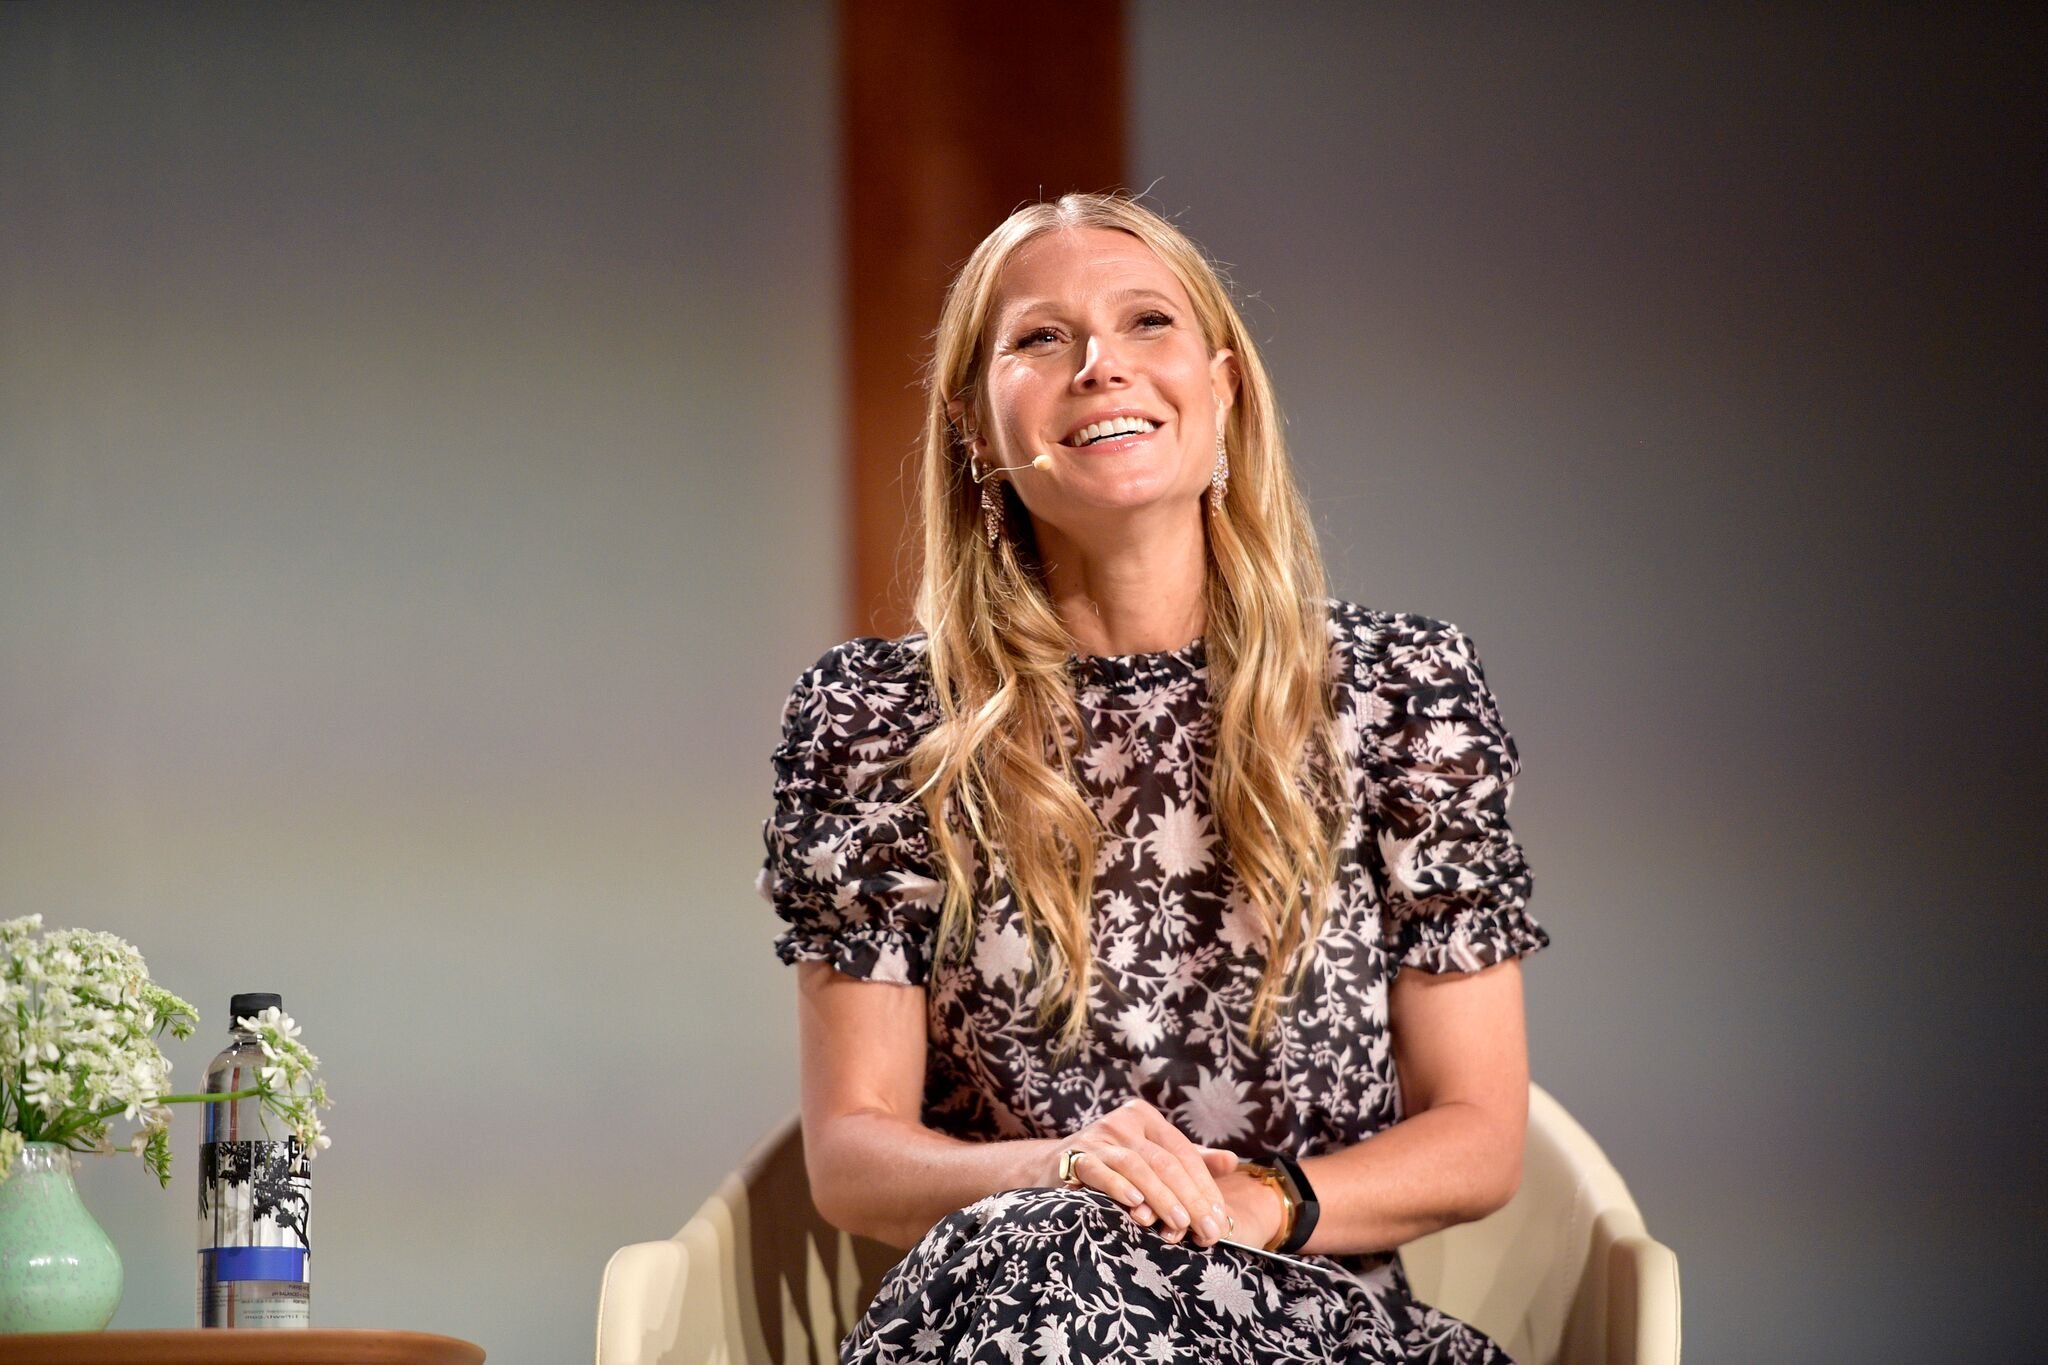 Gwyneth Paltrow speaks onstage at the In goop Health Summit at 3Labs | Getty Images